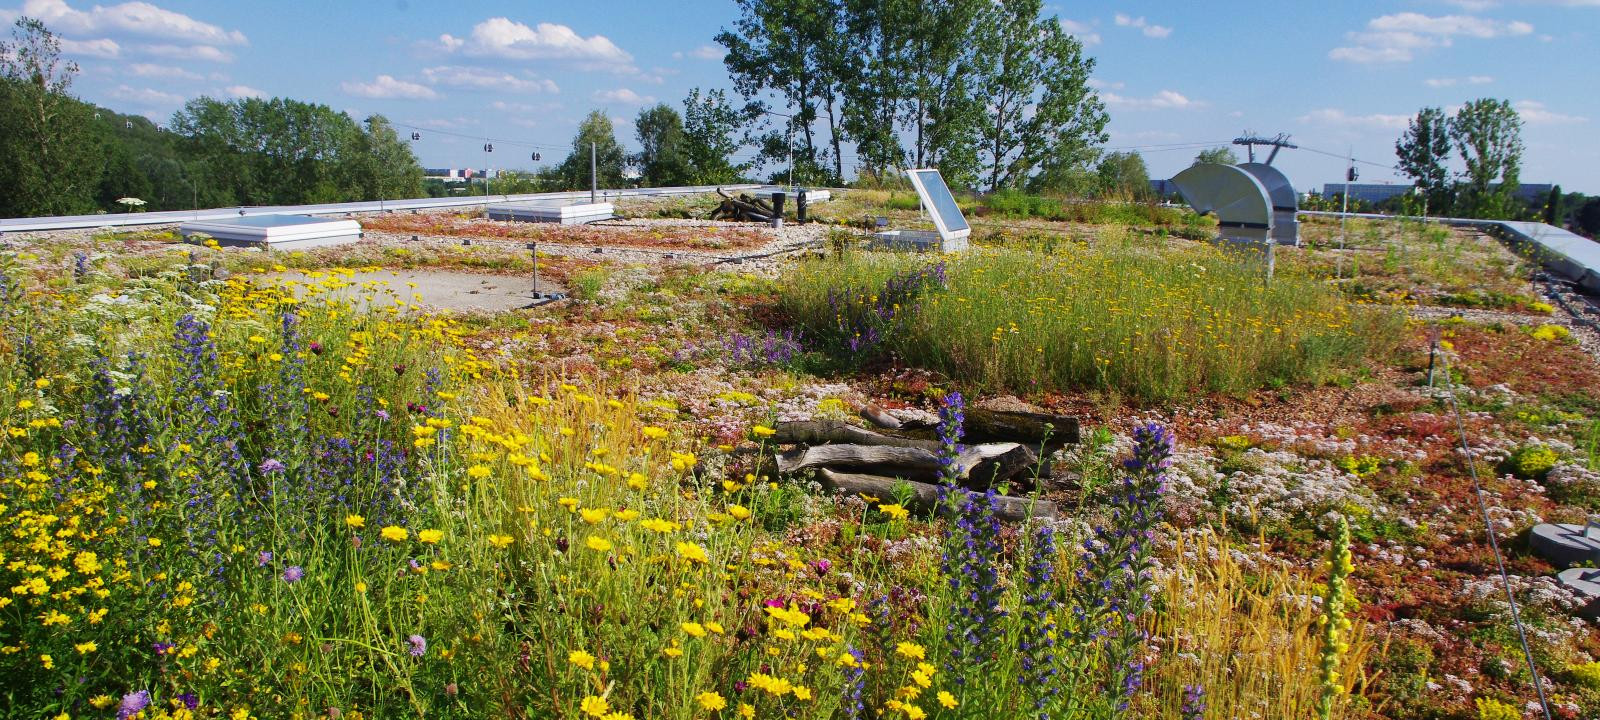 Extensive Green Roof - Biodiverse Green Roofs